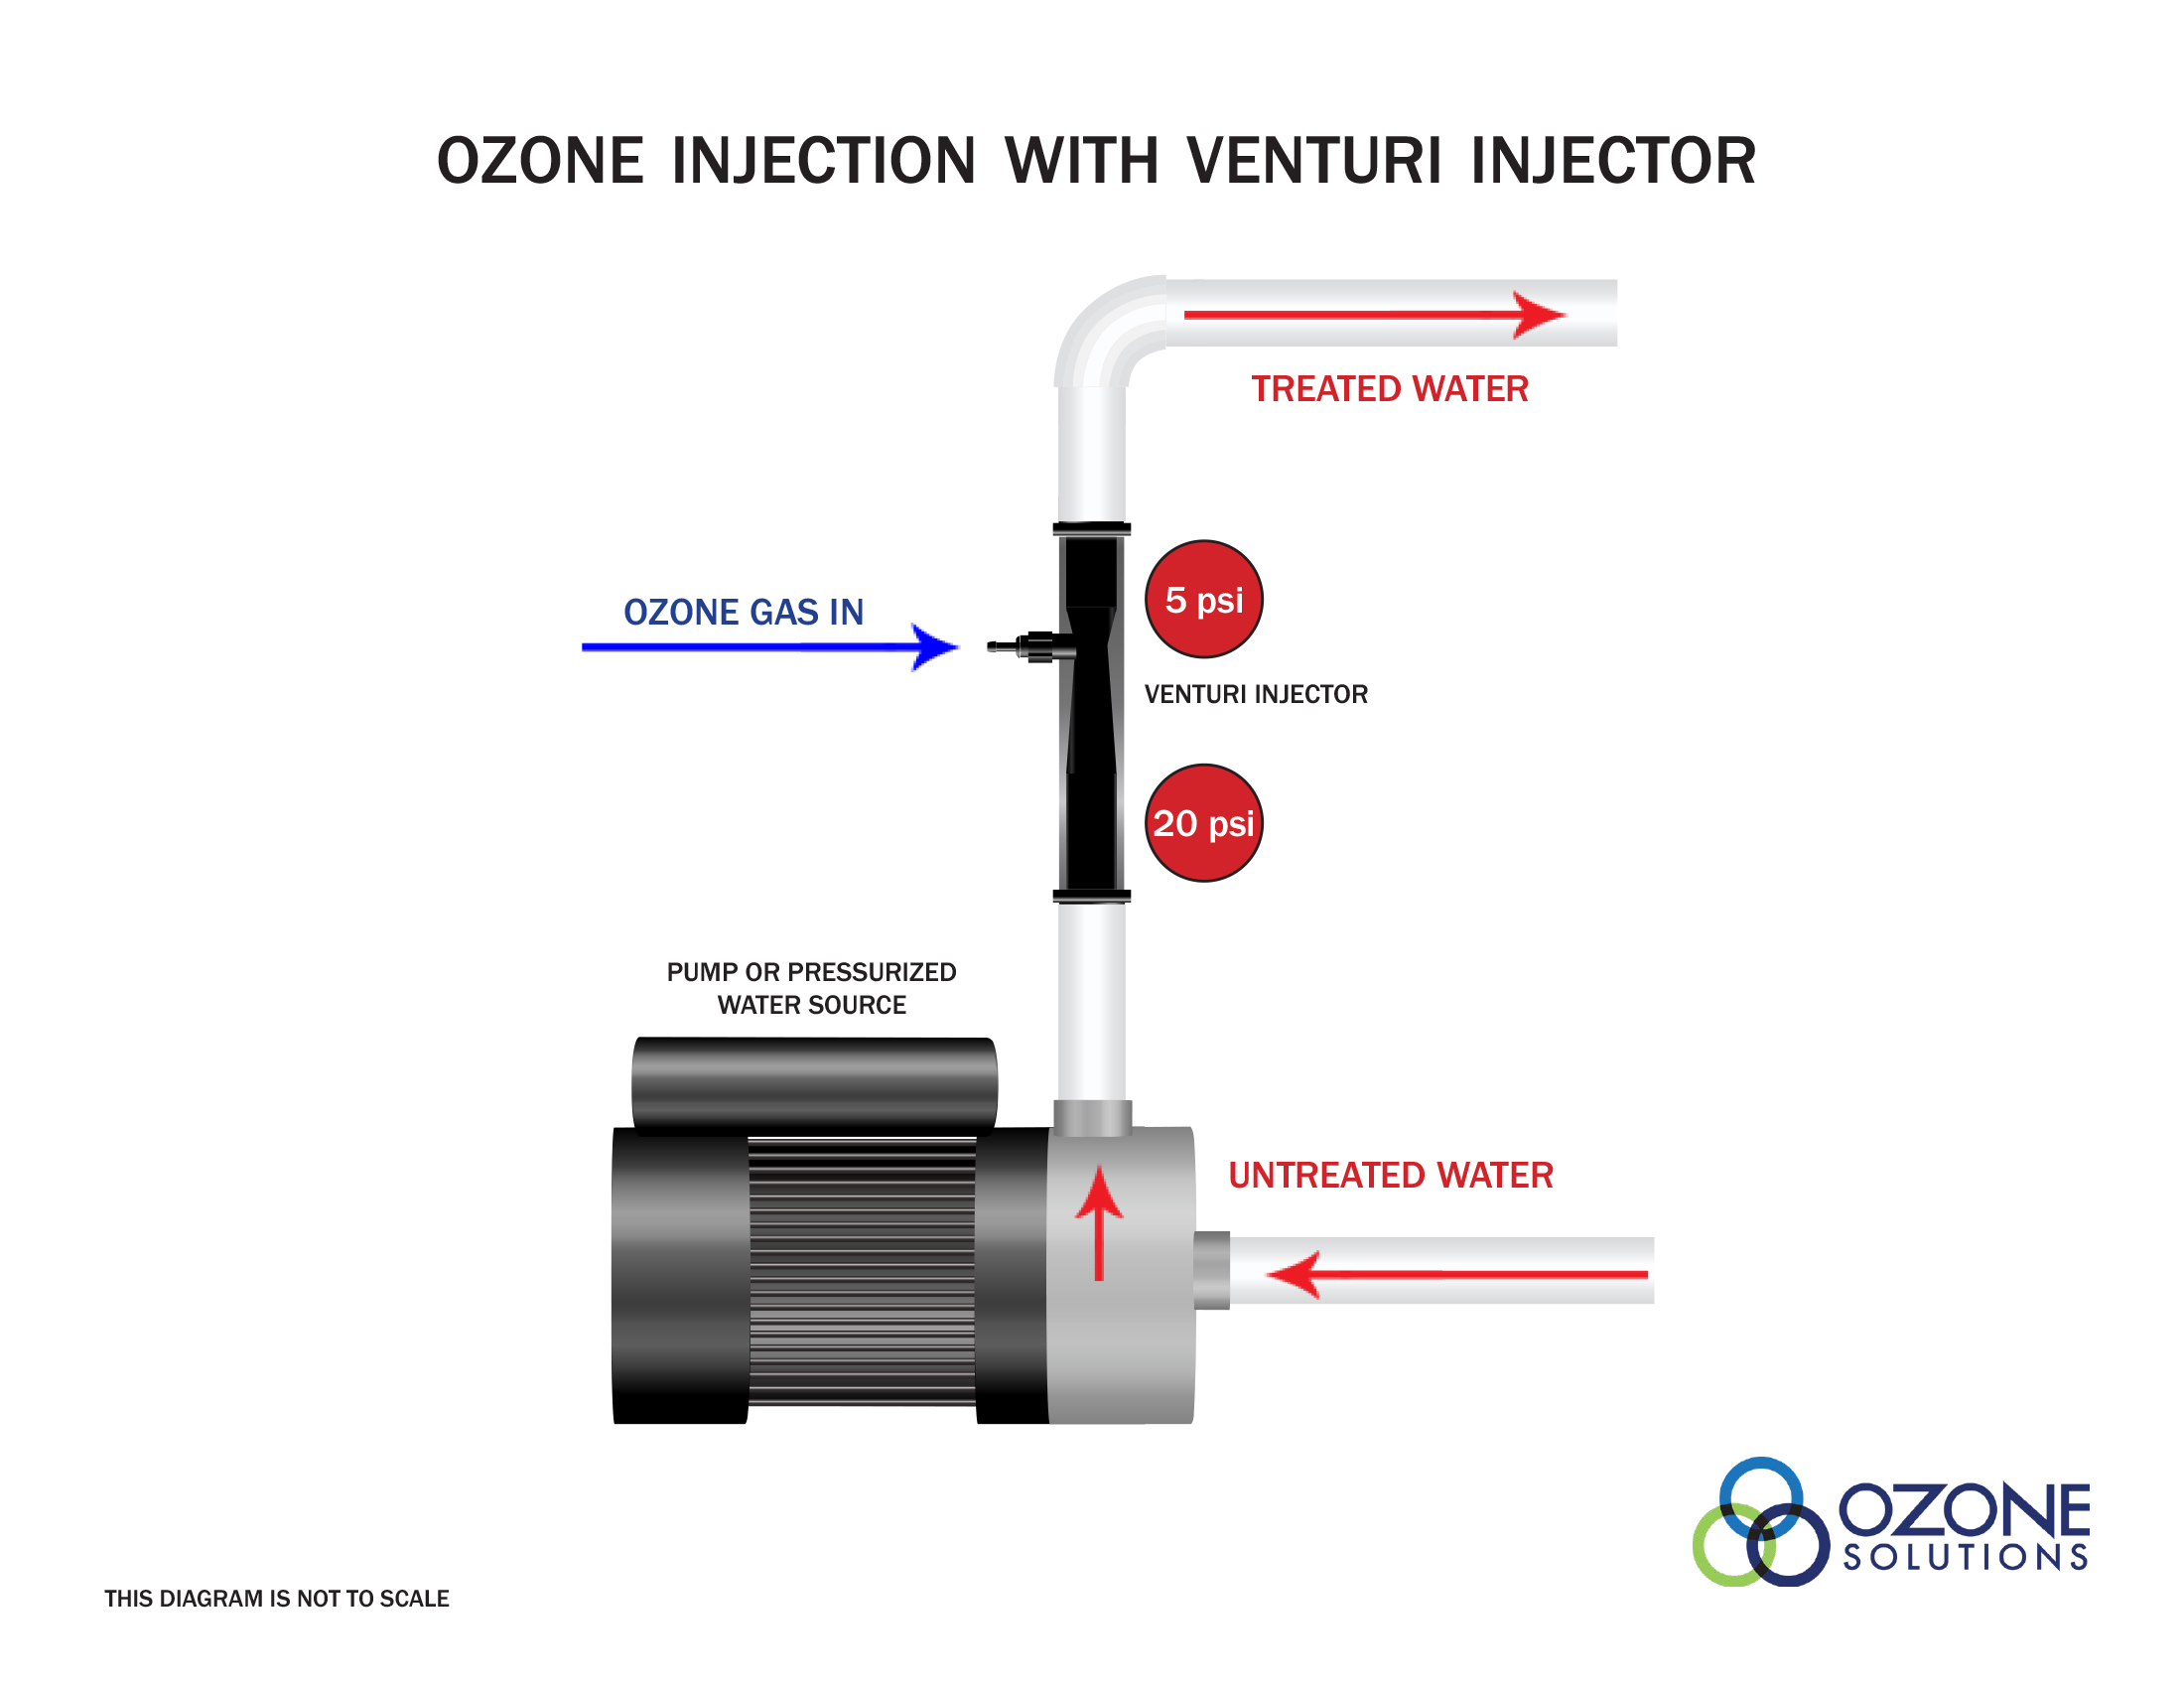 R2B2 Irrigation Venturi Tube Ozone-Water Mixer Ejector Injector Sizes. 